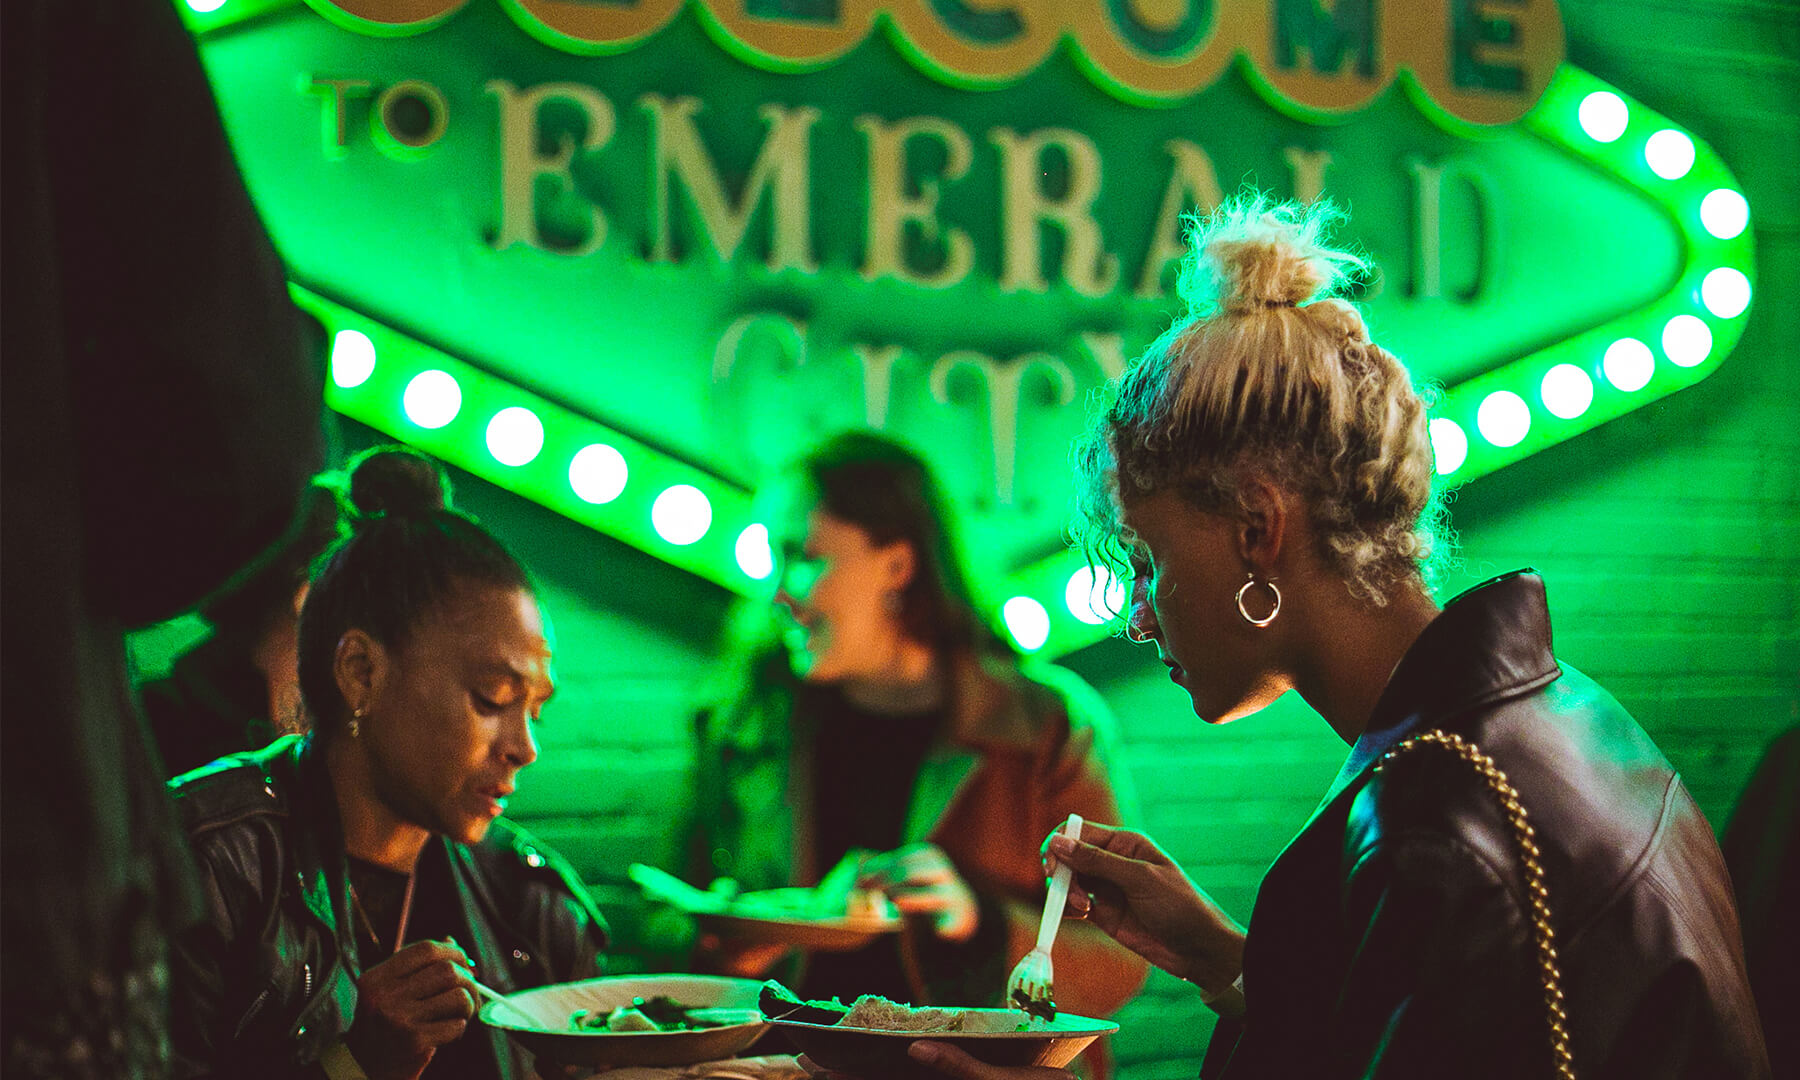 Two people eating street food in Shoreditch